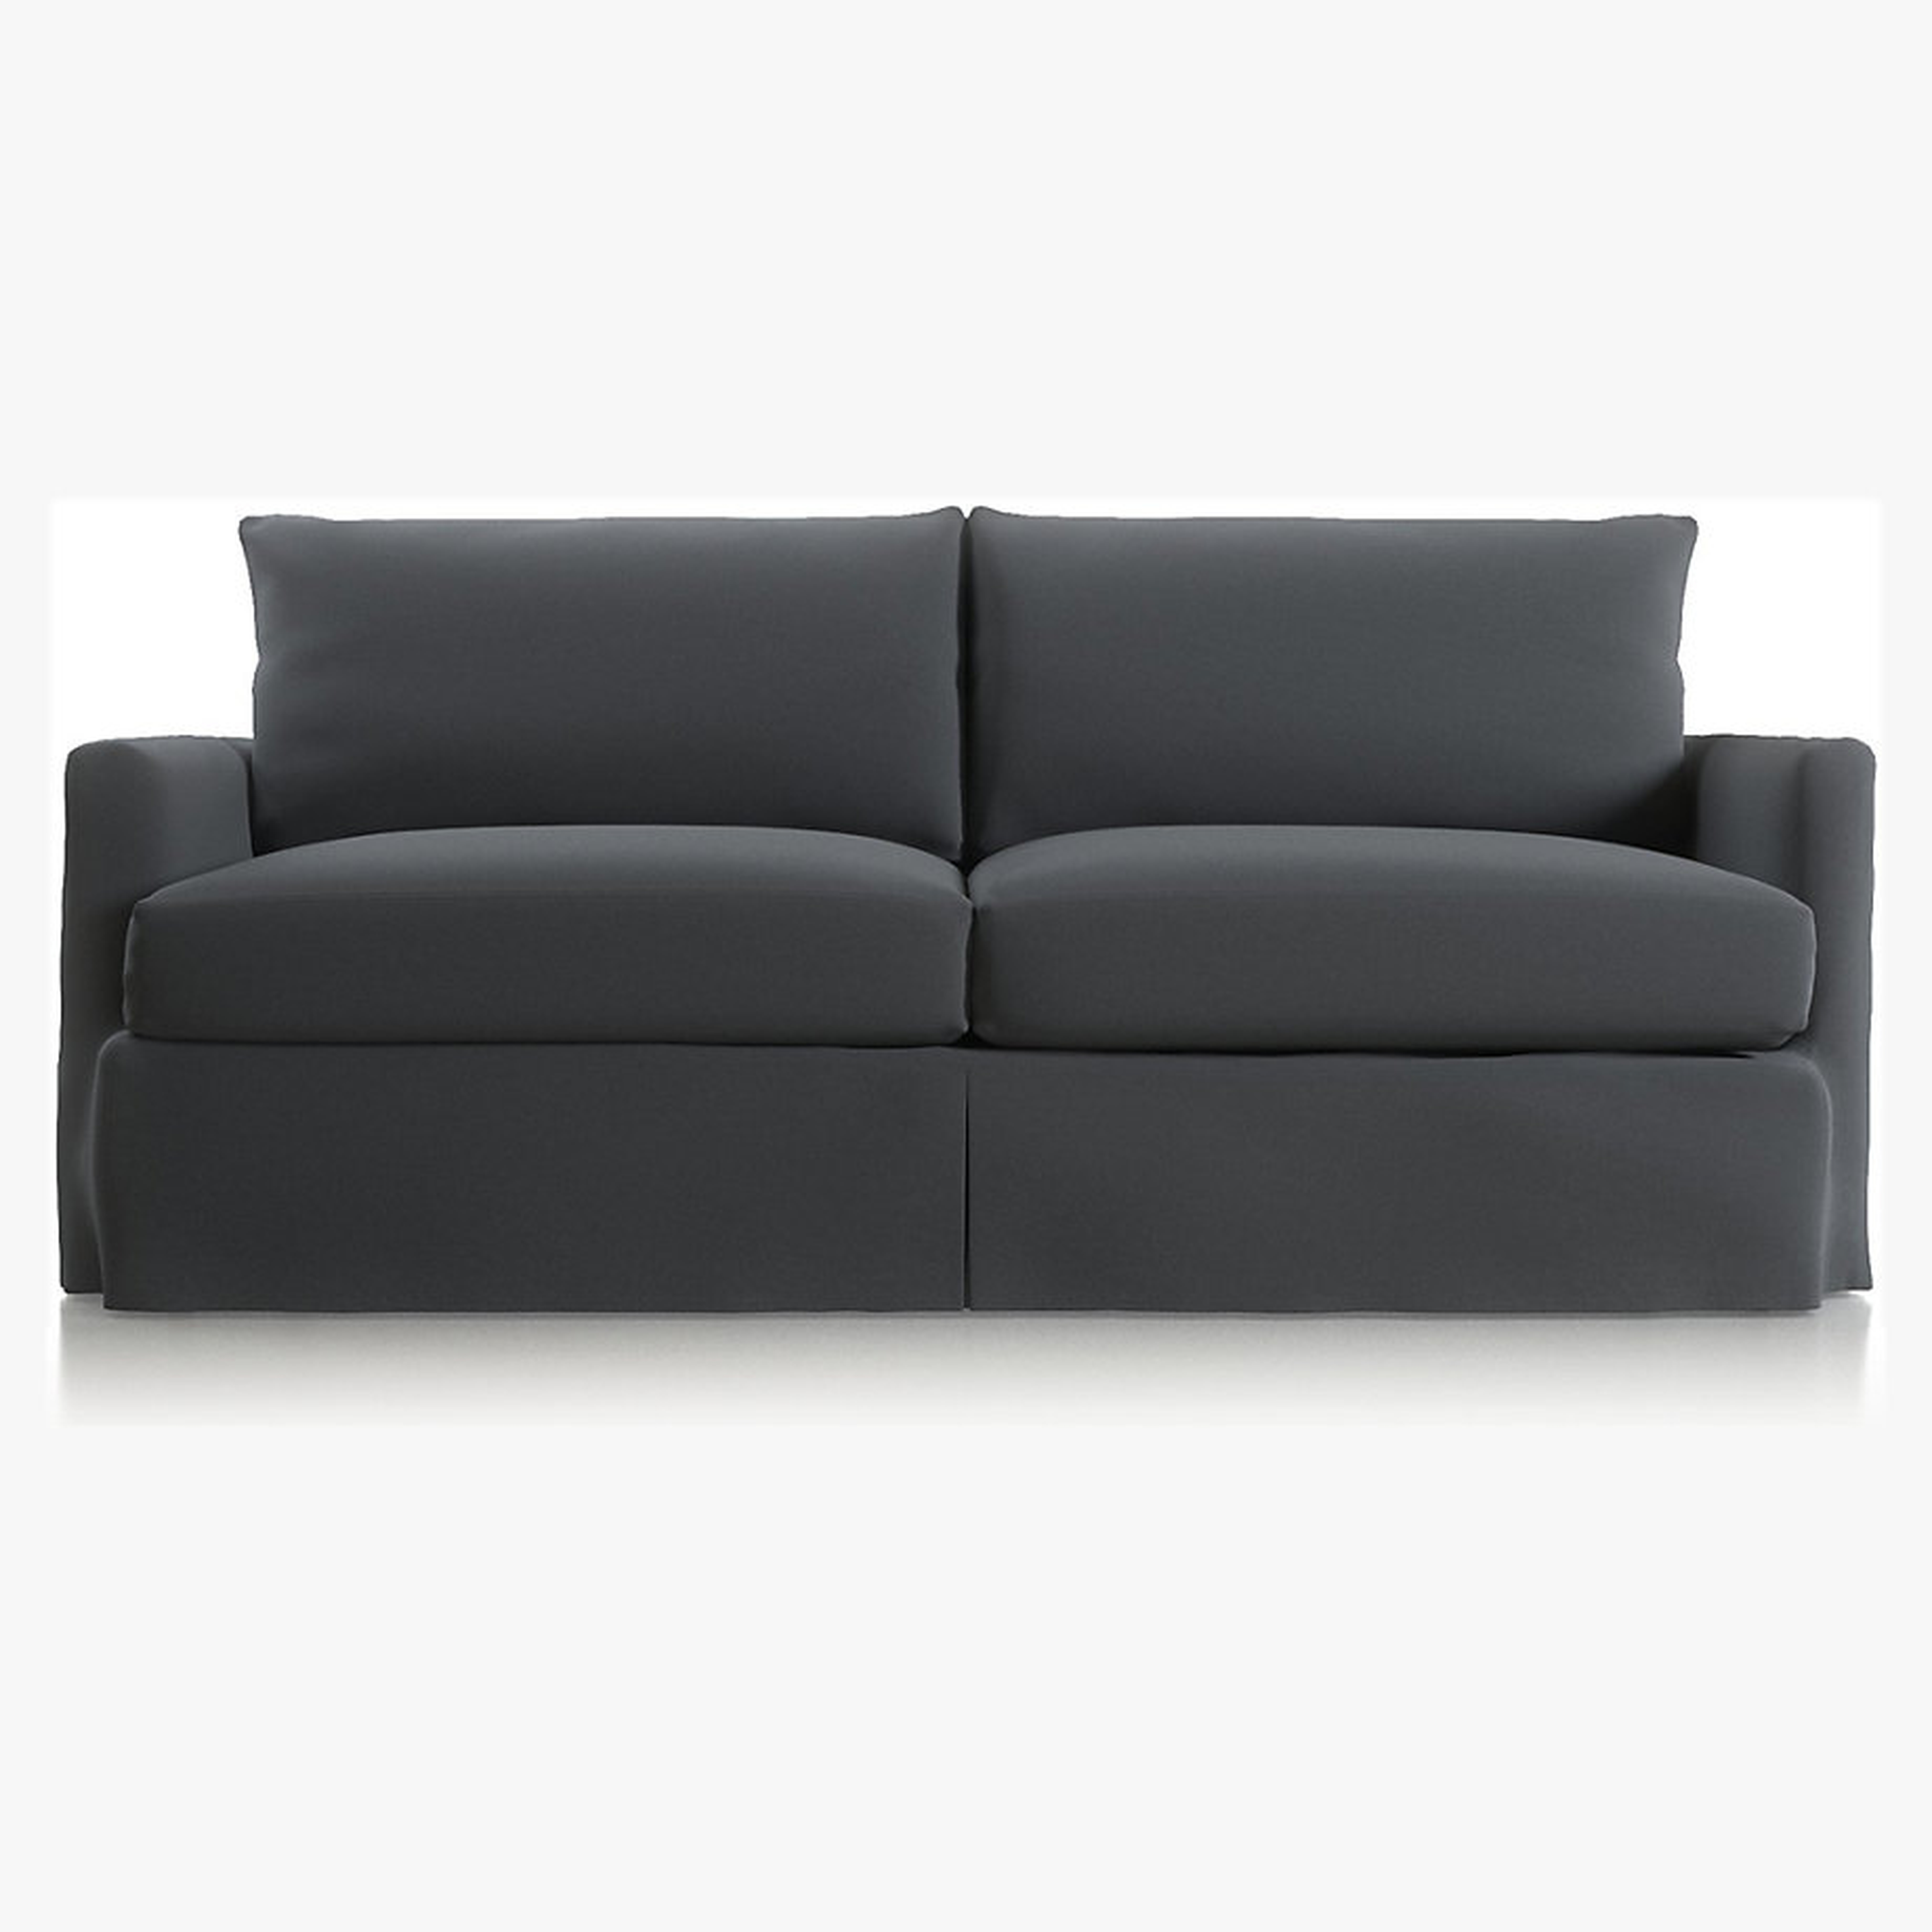 Lounge Outdoor Slipcovered Sofa 83" - Crate and Barrel